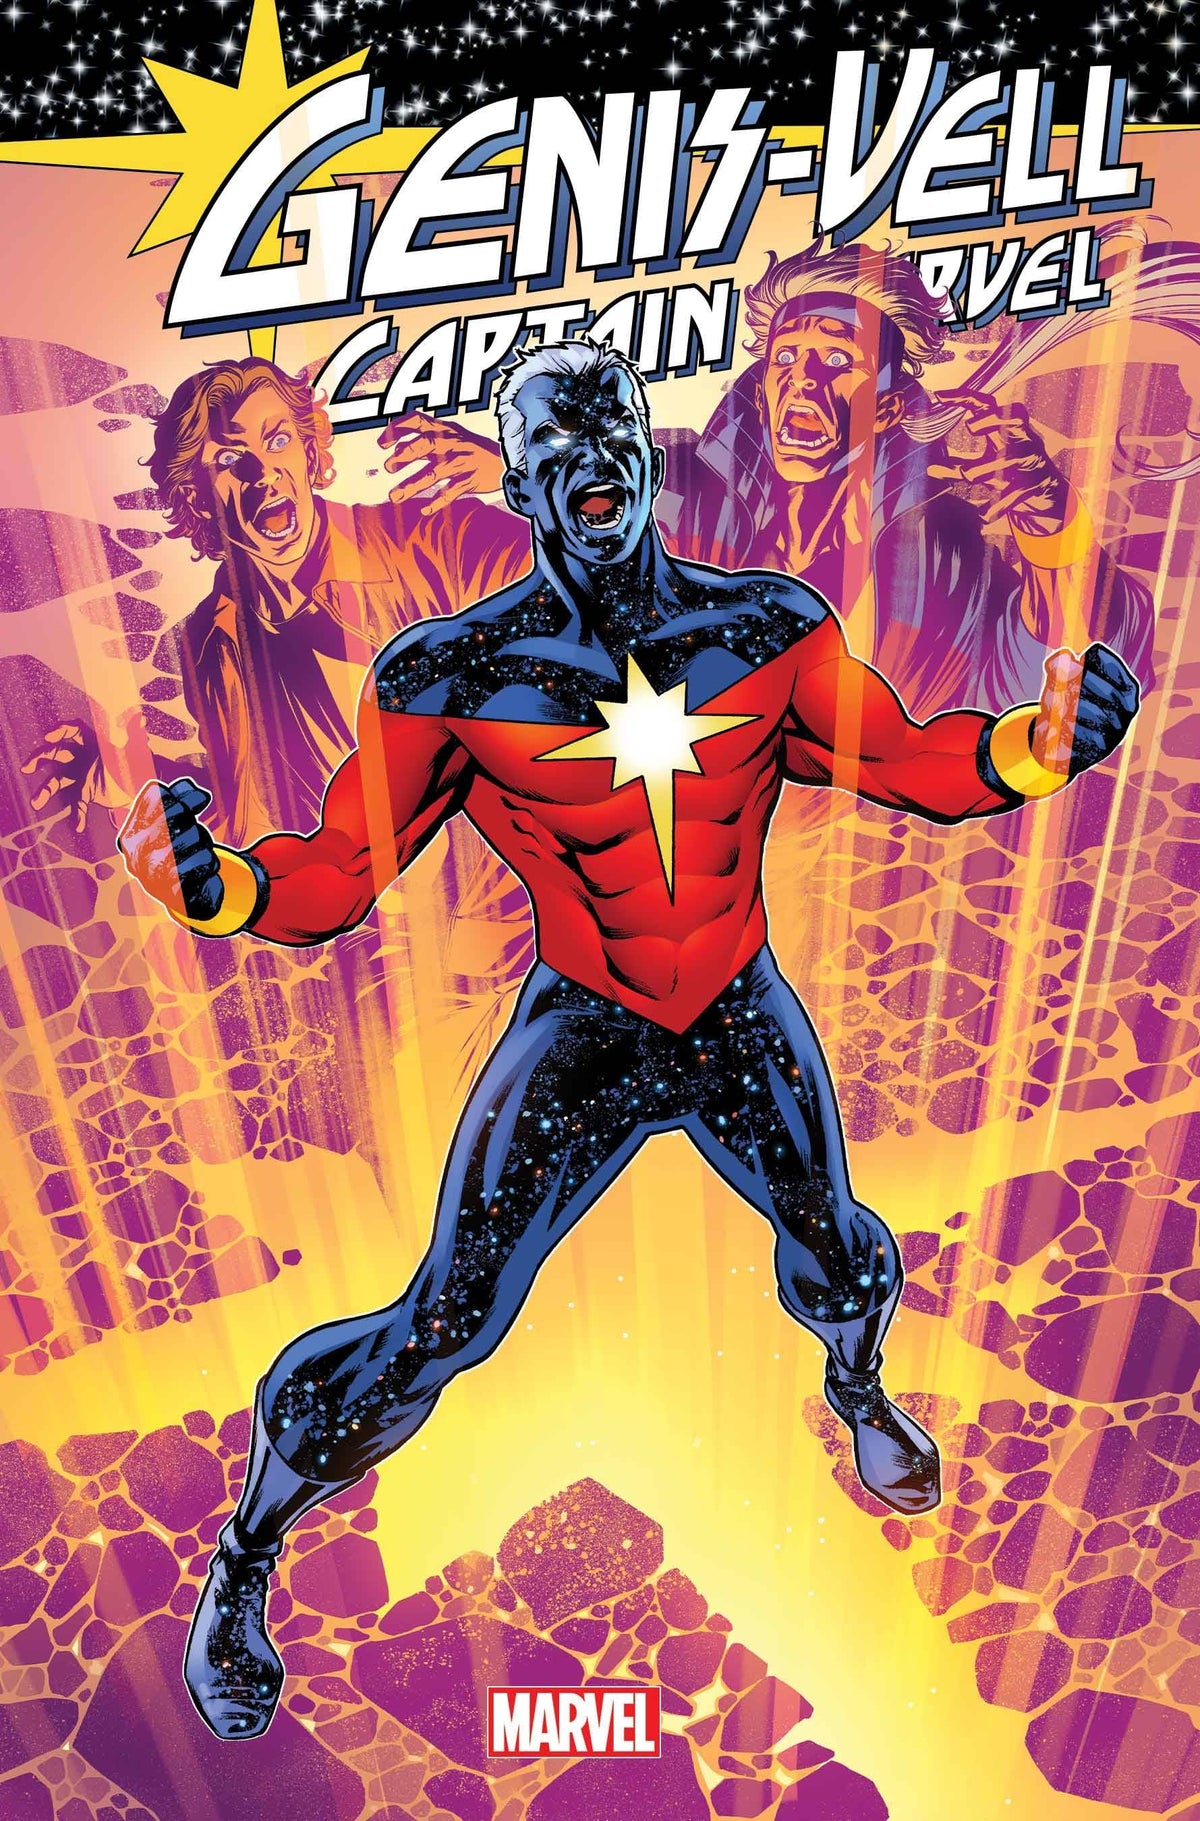 Genis-Vell Captain Marvel #1 (Of 5) (06/01/2022) - State of Comics